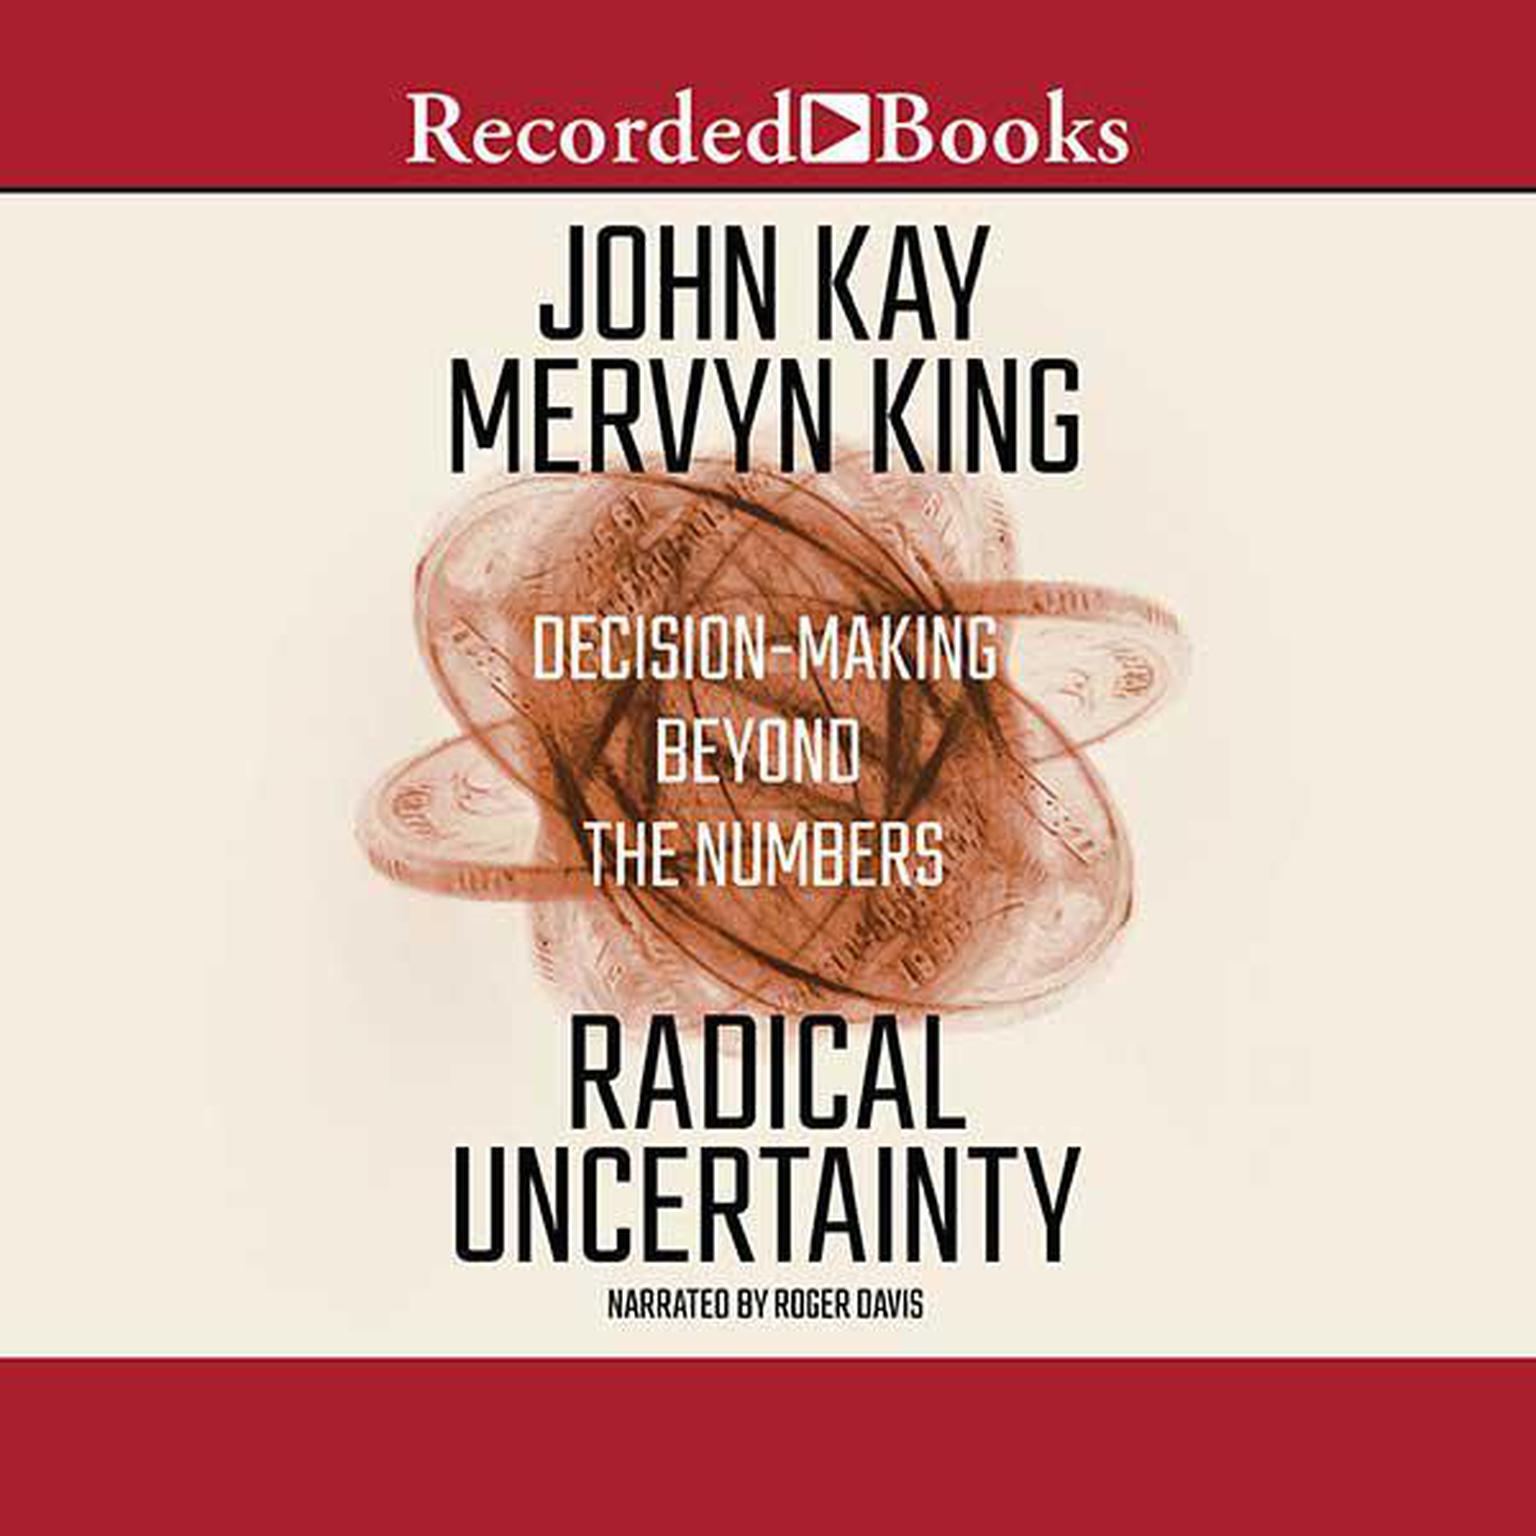 Radical Uncertainty: Decision-Making Beyond the Numbers Audiobook, by John Kay